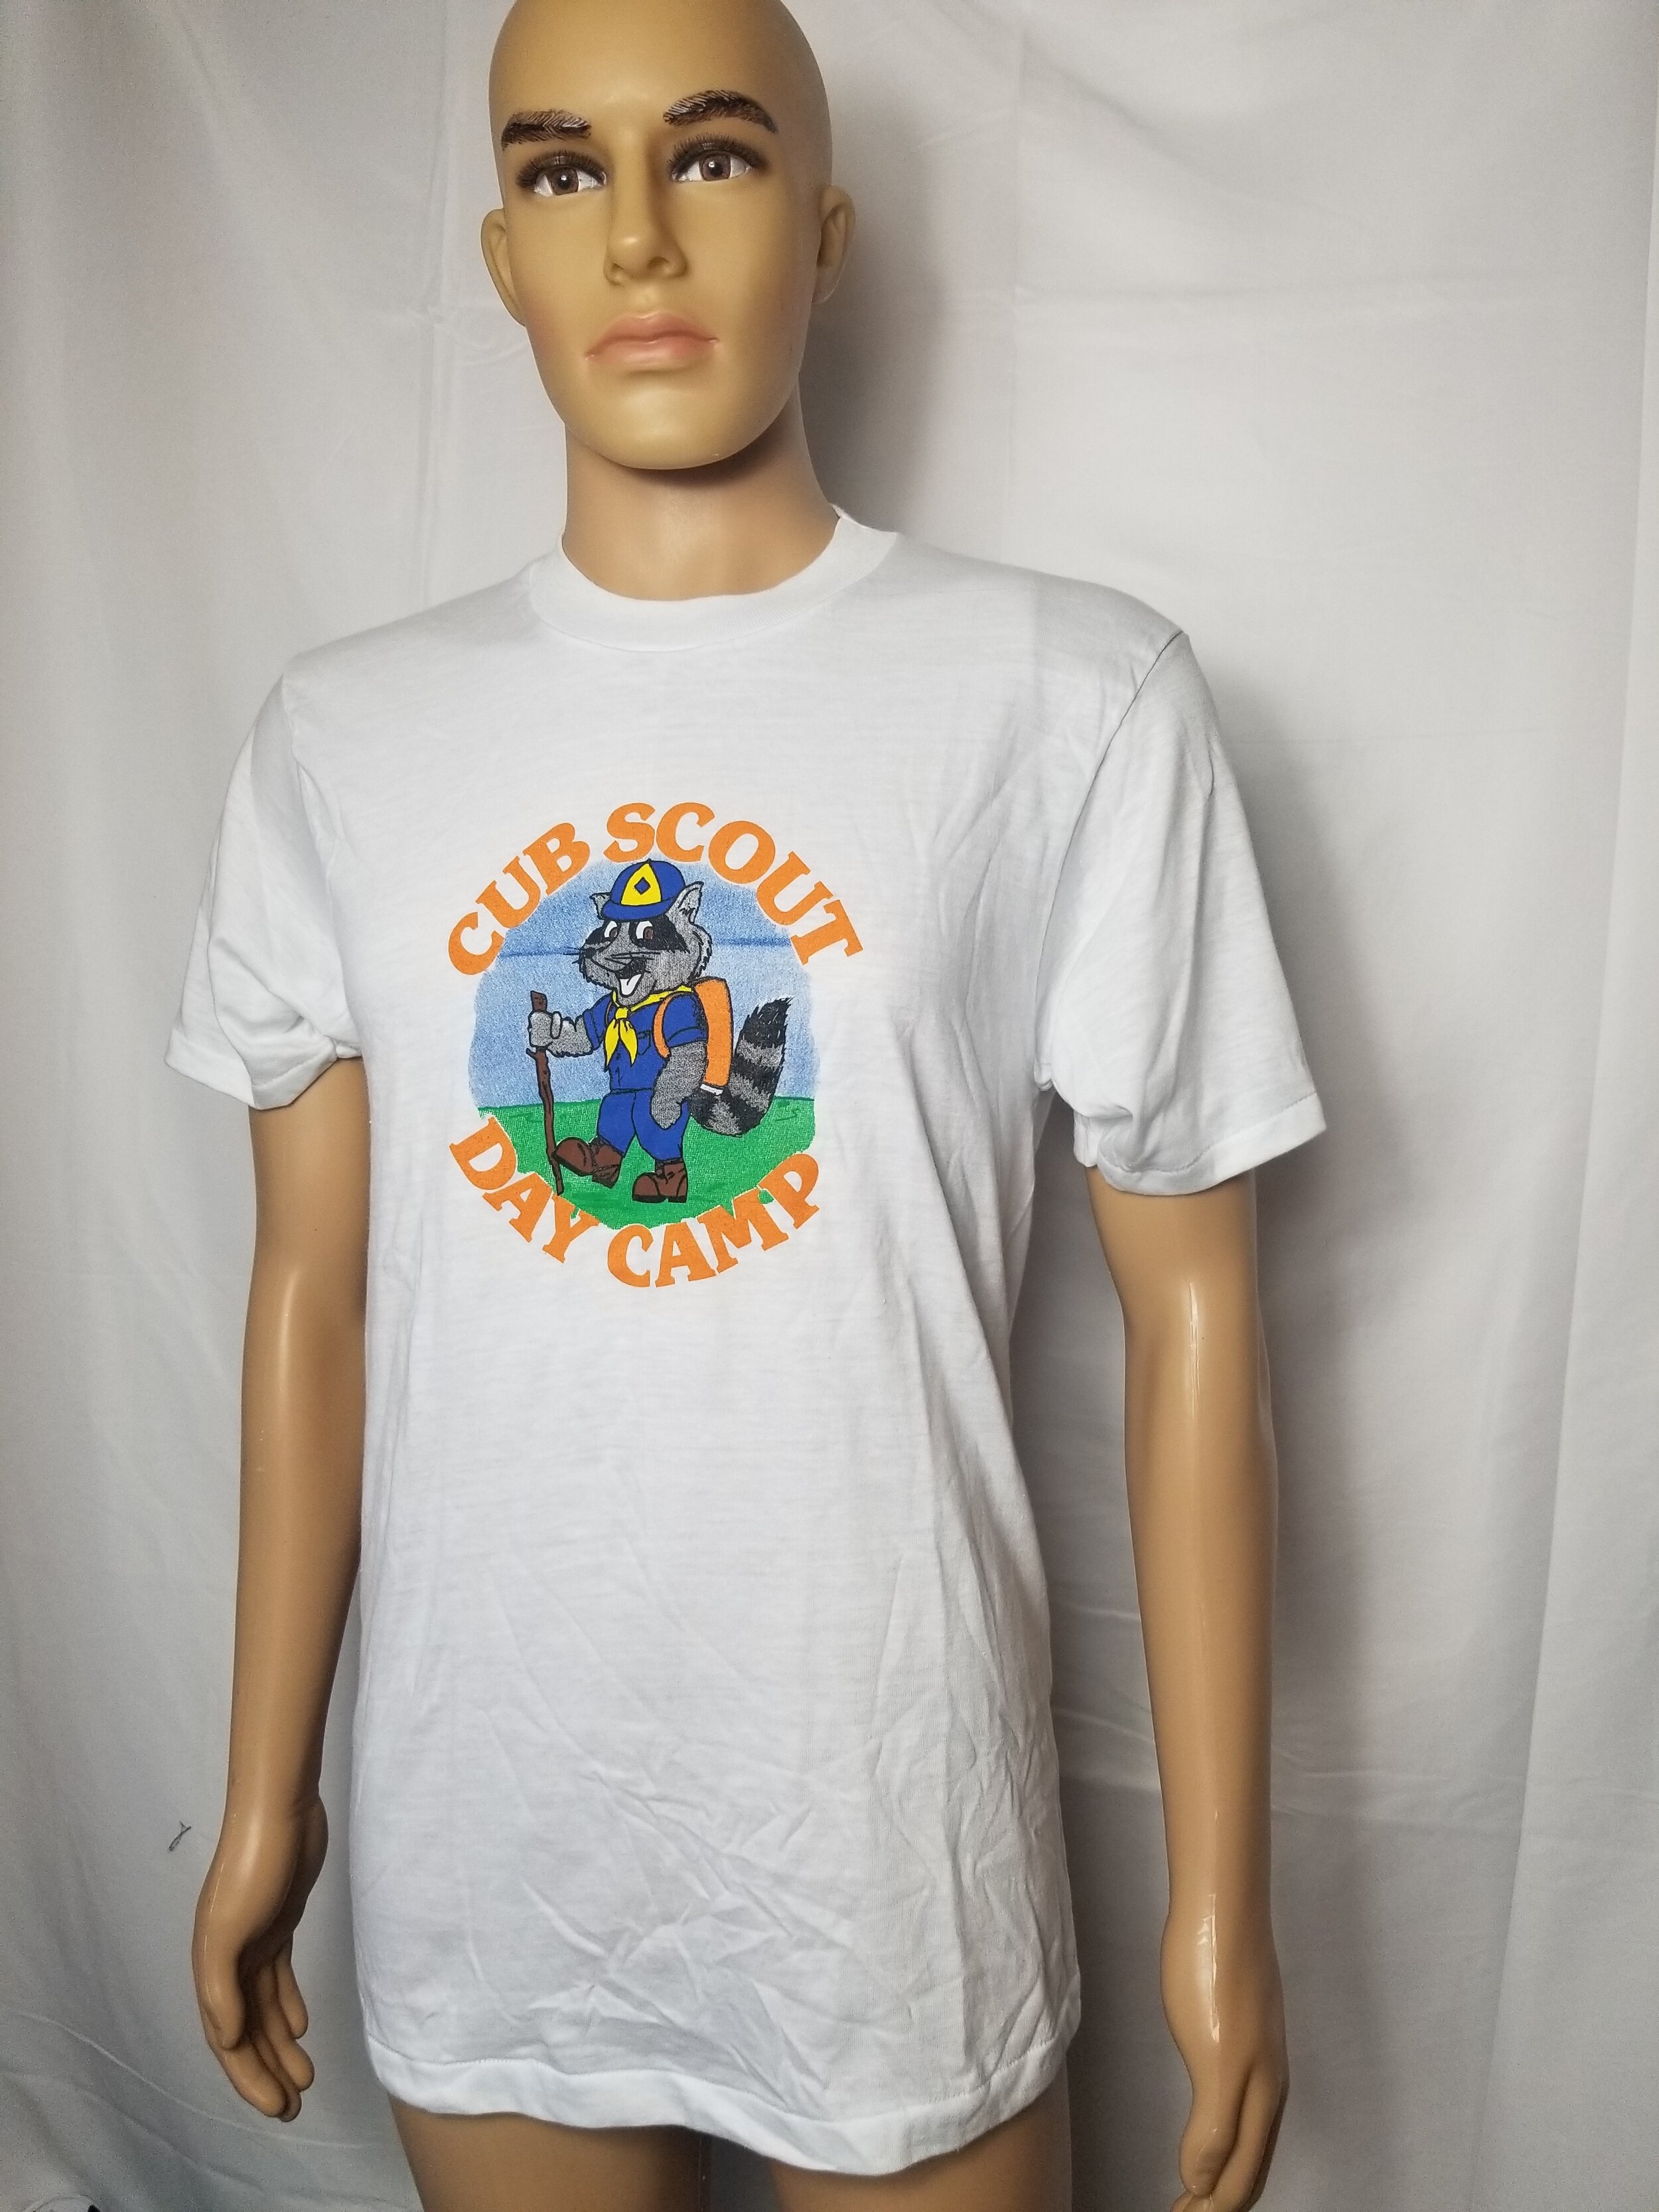 Rare Vintage Cub Scout Day Camp Single Stitch T Shirt 80s 1980s 50/50 Hanes USA